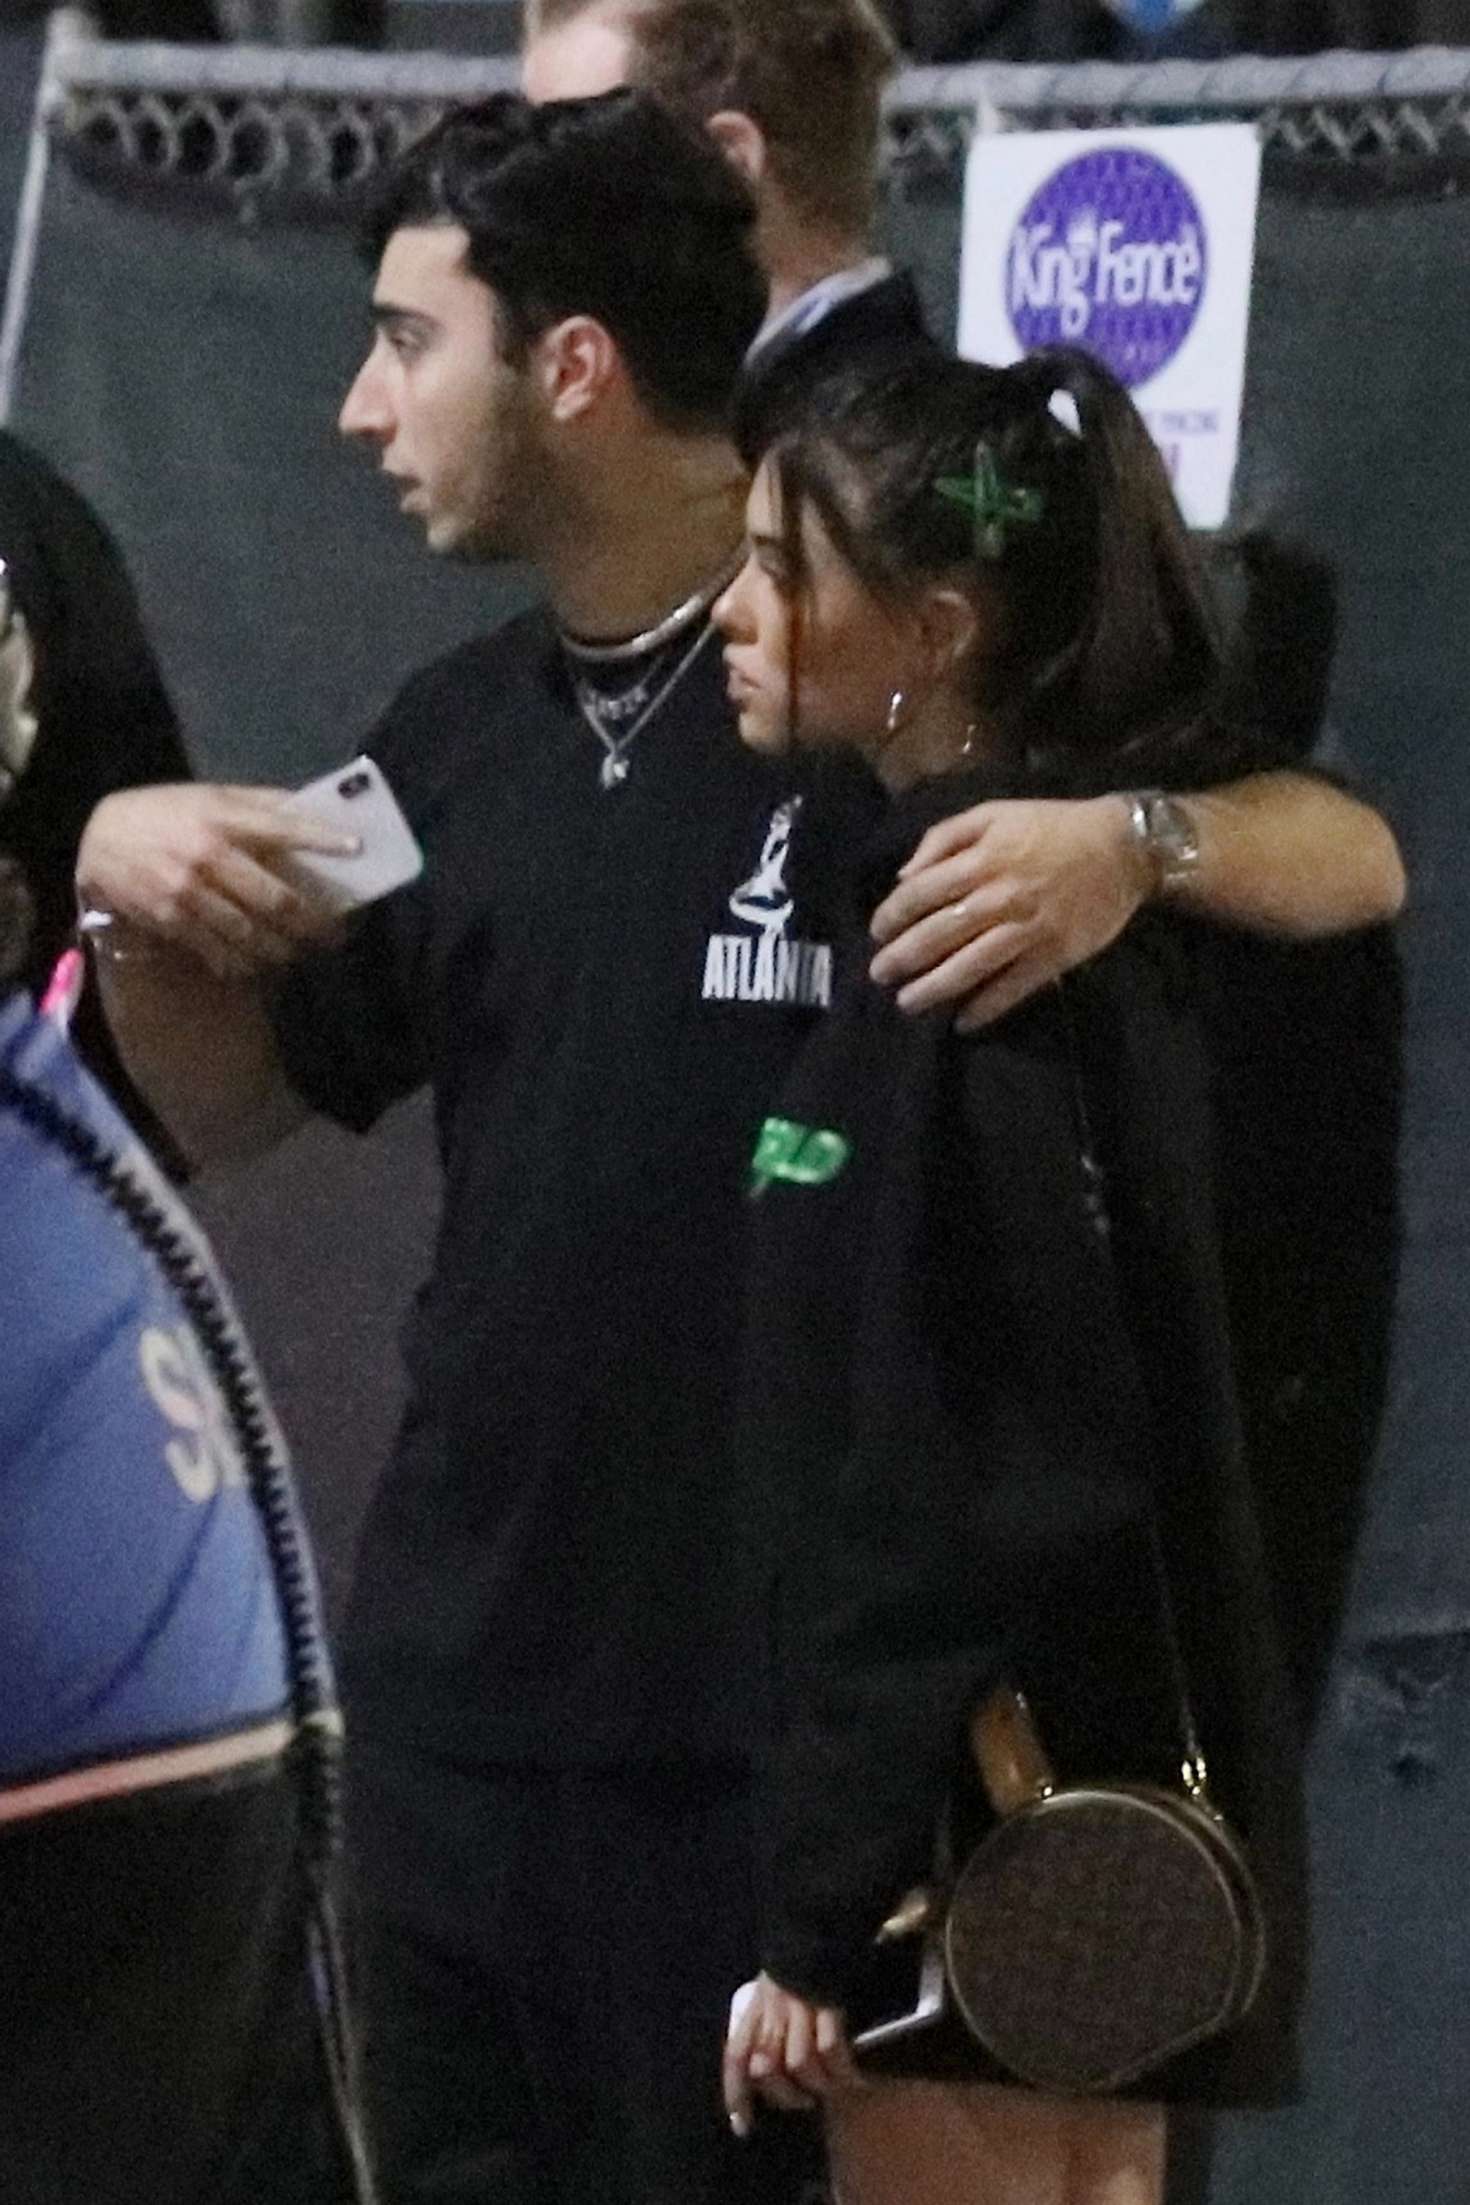 Madison Beer â€“ Outside The Forum in Inglewood